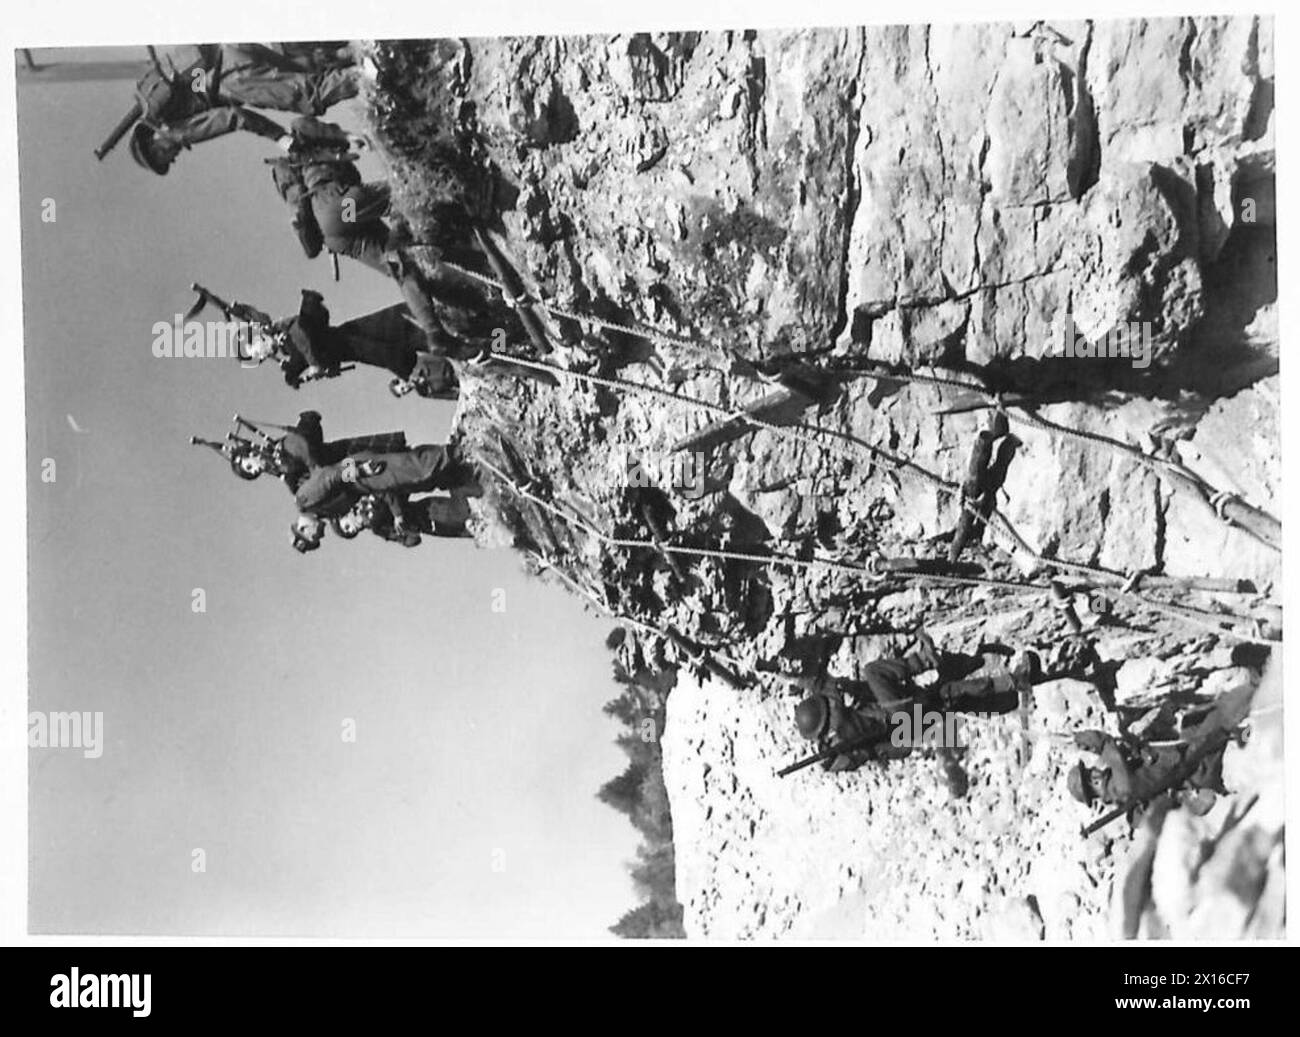 HIGHLAND DIVISION BATTLE SCHOOL - To the strains of the bagpipes, men are seen scaling the cliffs British Army Stock Photo